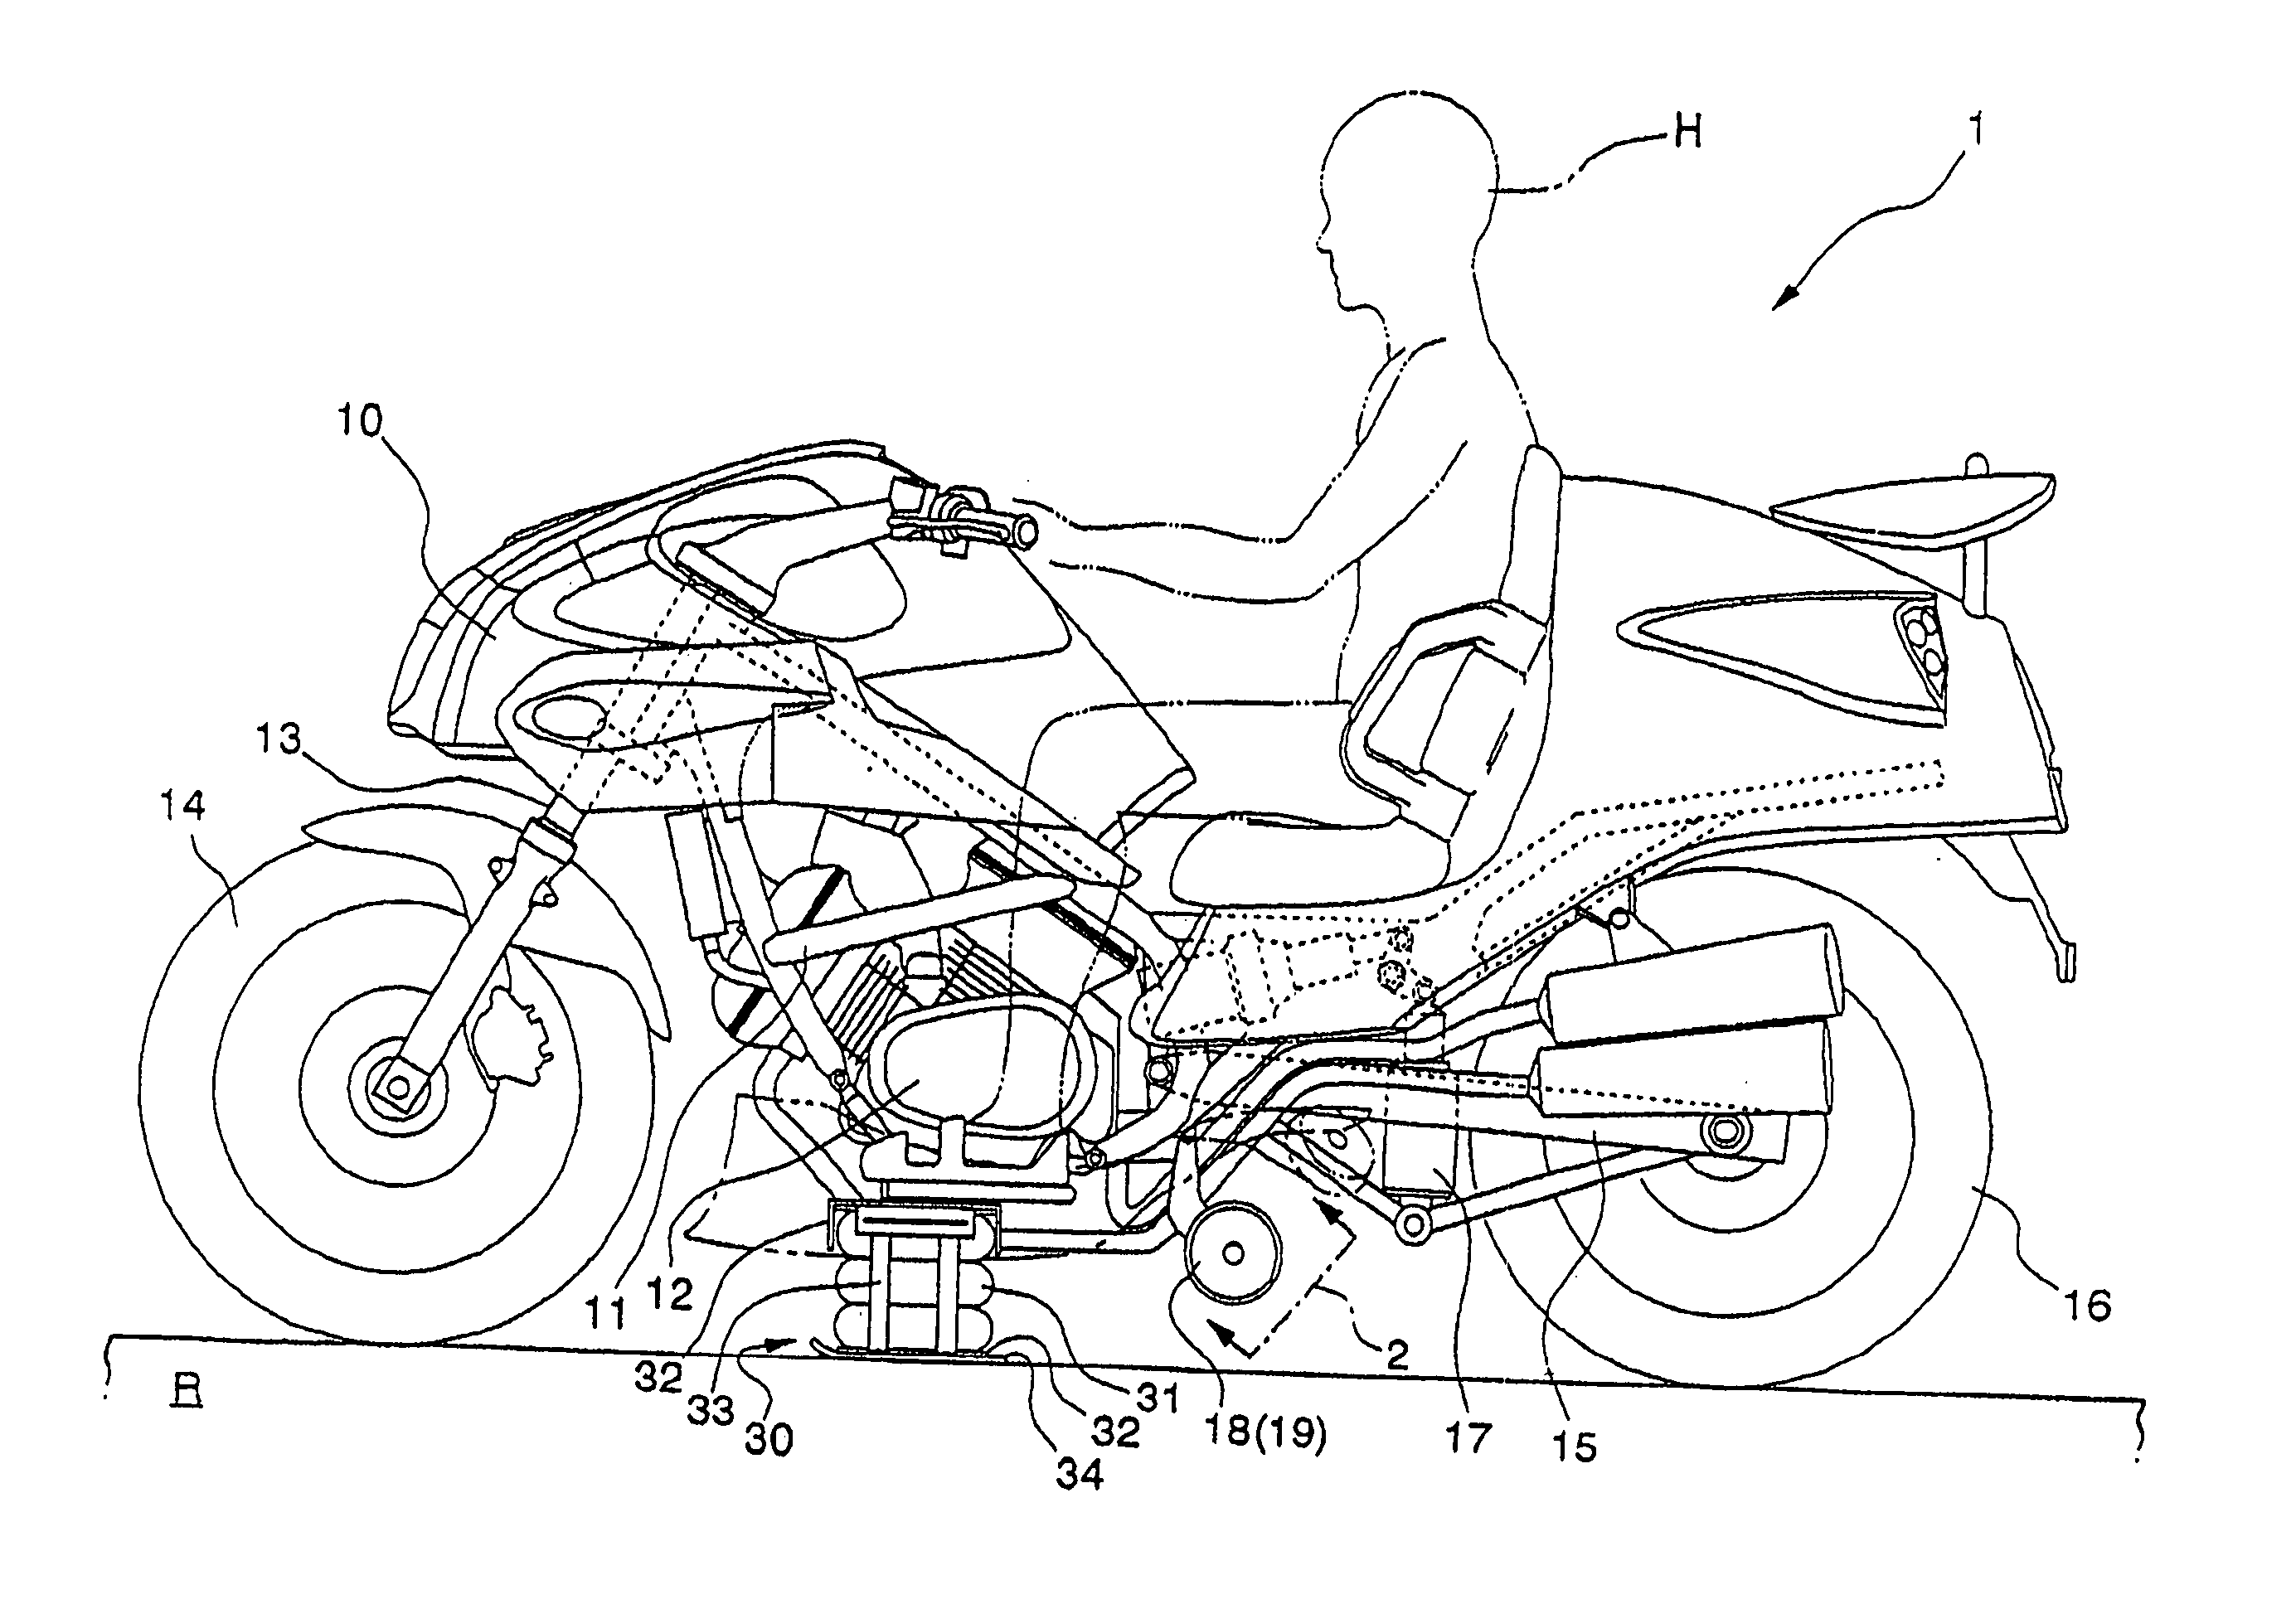 Motorcycle with auxiliary support